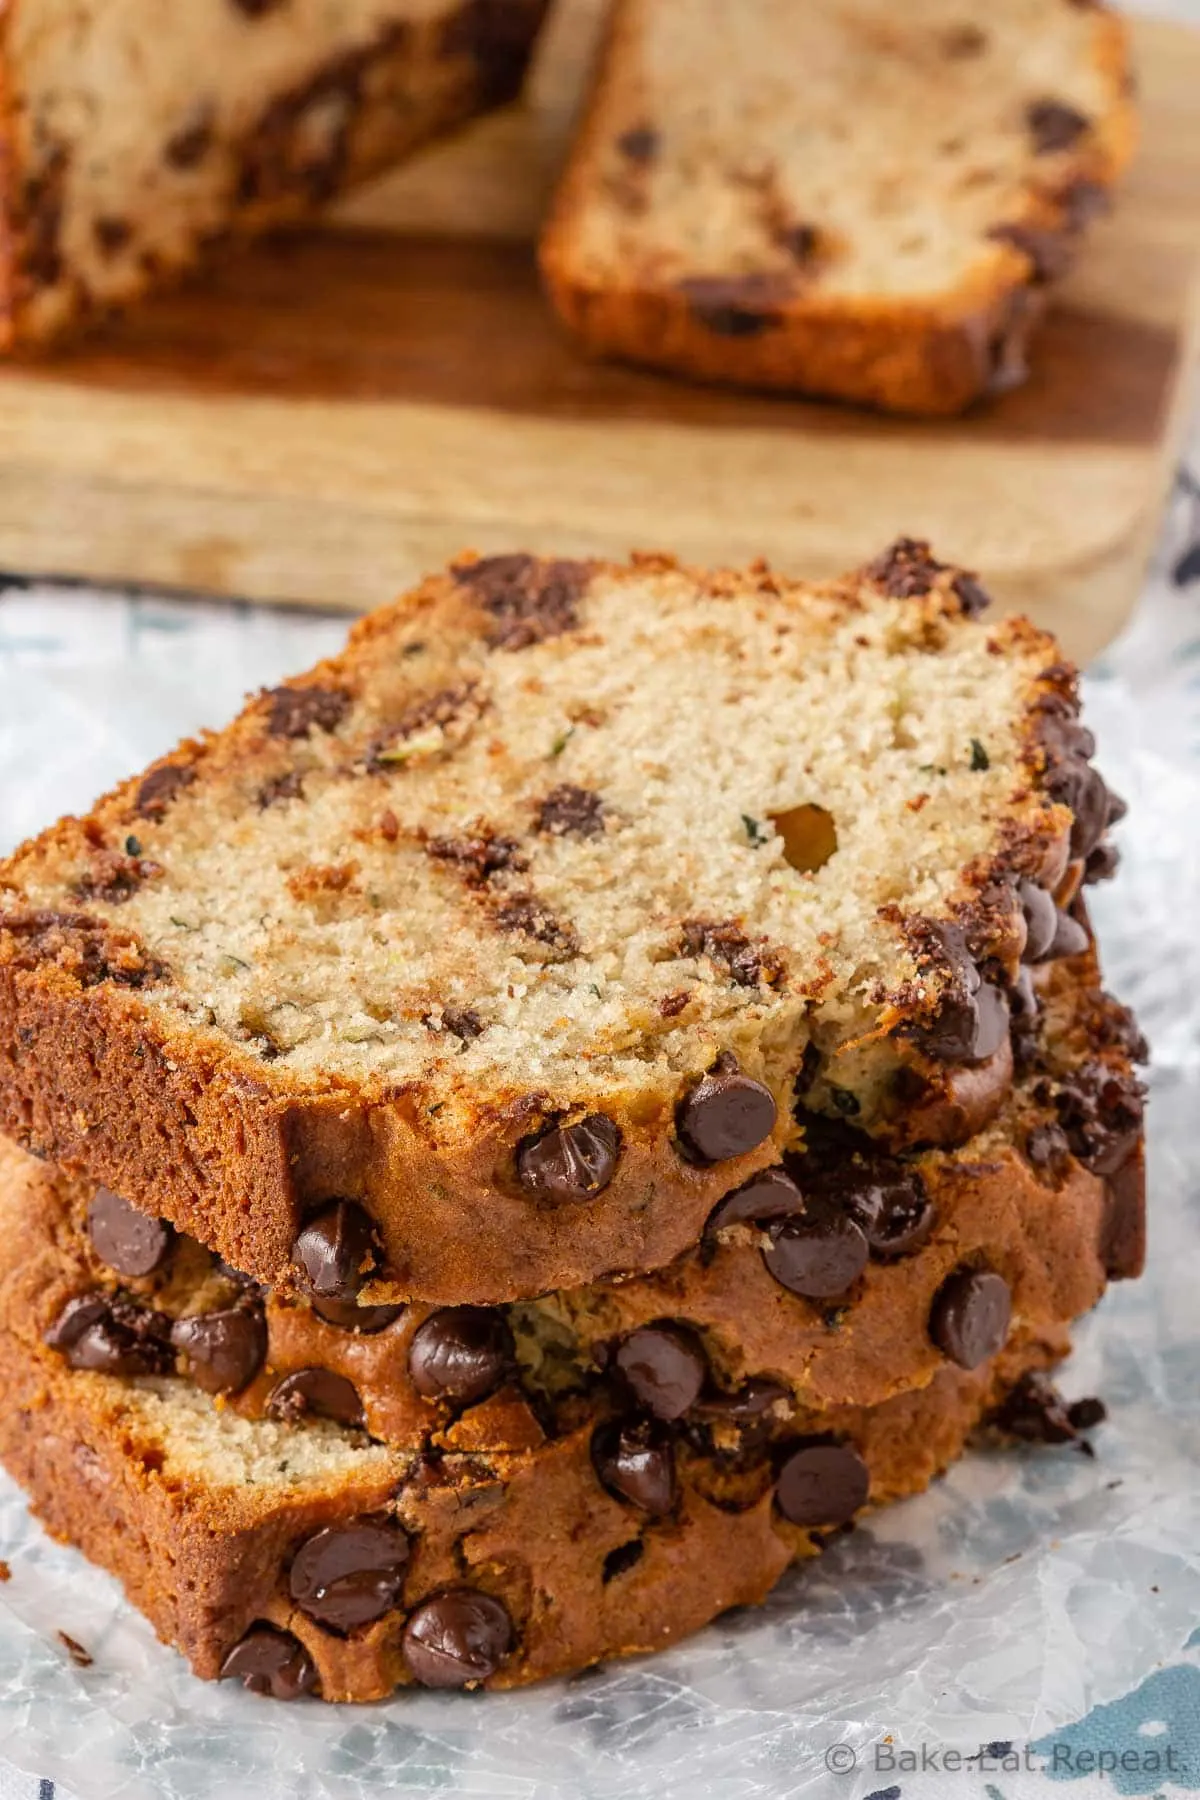 This chocolate chip zucchini bread is moist and flavourful, and filled with chocolate chips. Easy to make, it mixes up in minutes and everyone will love it!